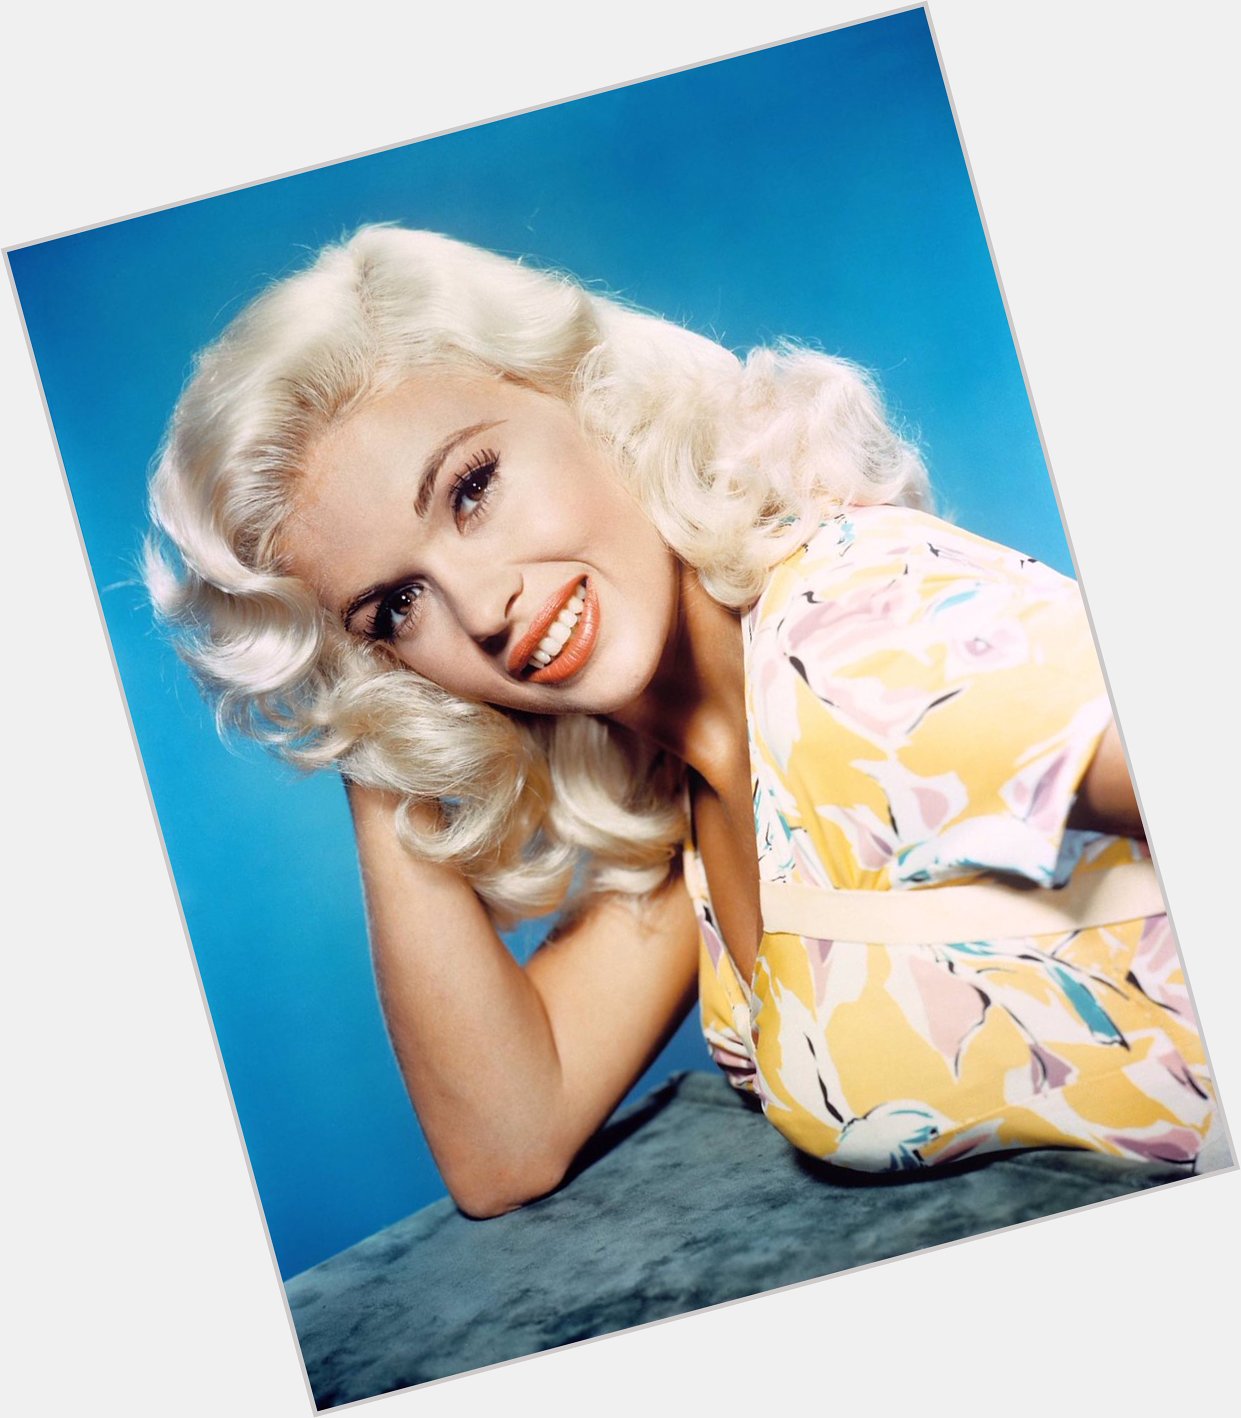 Happy Birthday Jayne Mansfield, who would have been 84 today. R.I.P xx    